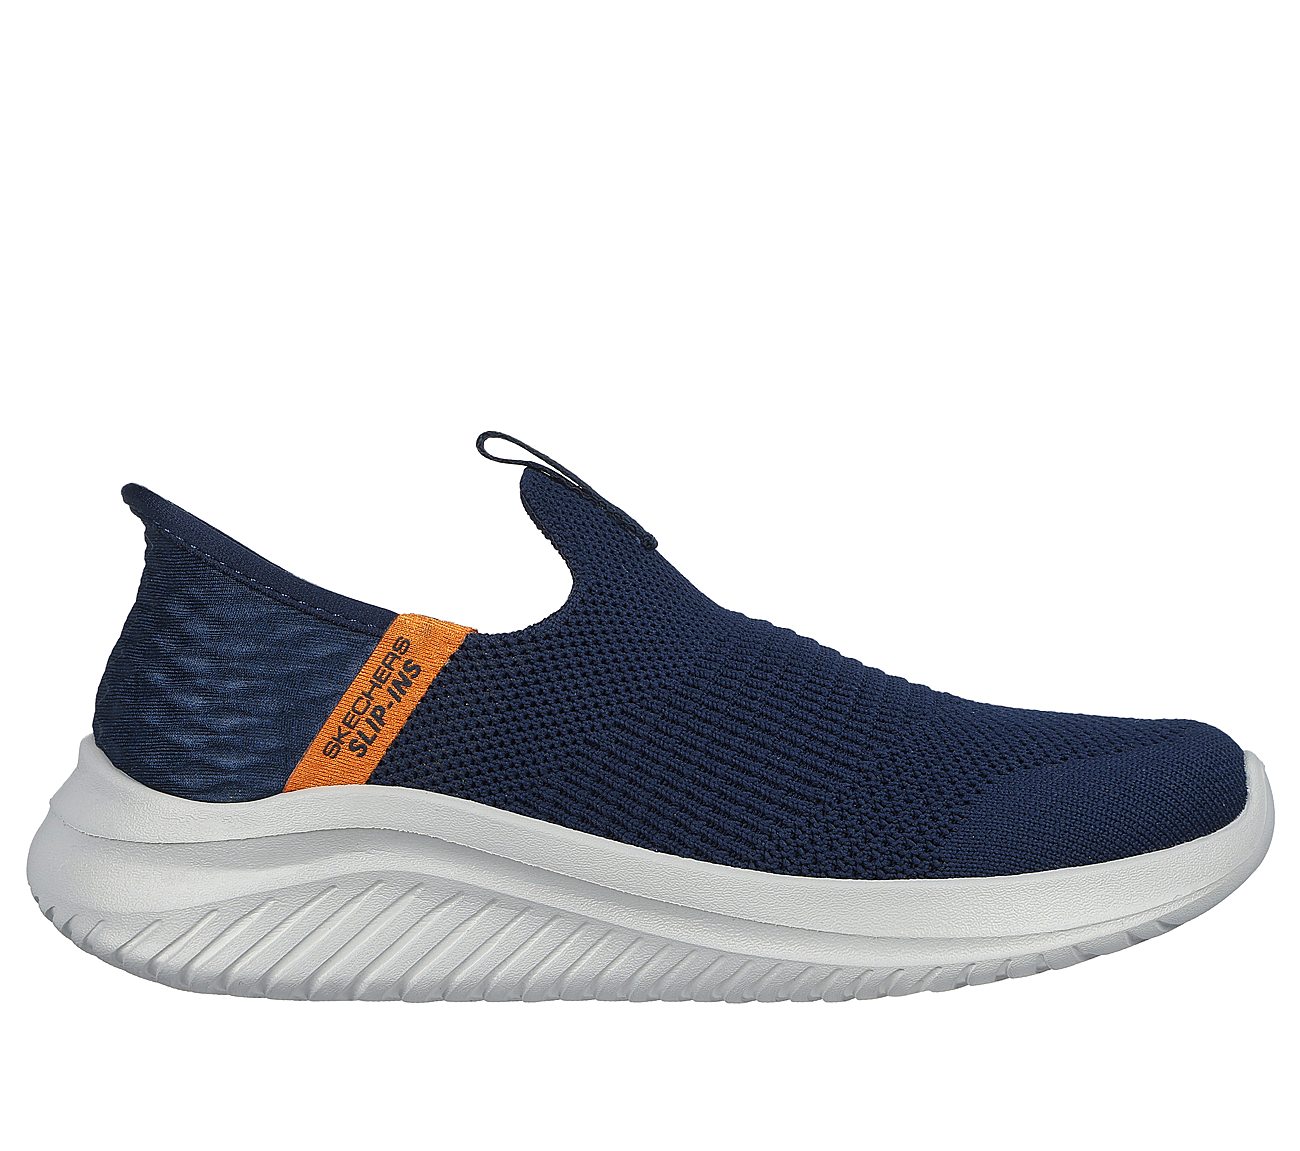 ULTRA FLEX 3.0 - SMOOTH STEP, NNNAVY Footwear Lateral View